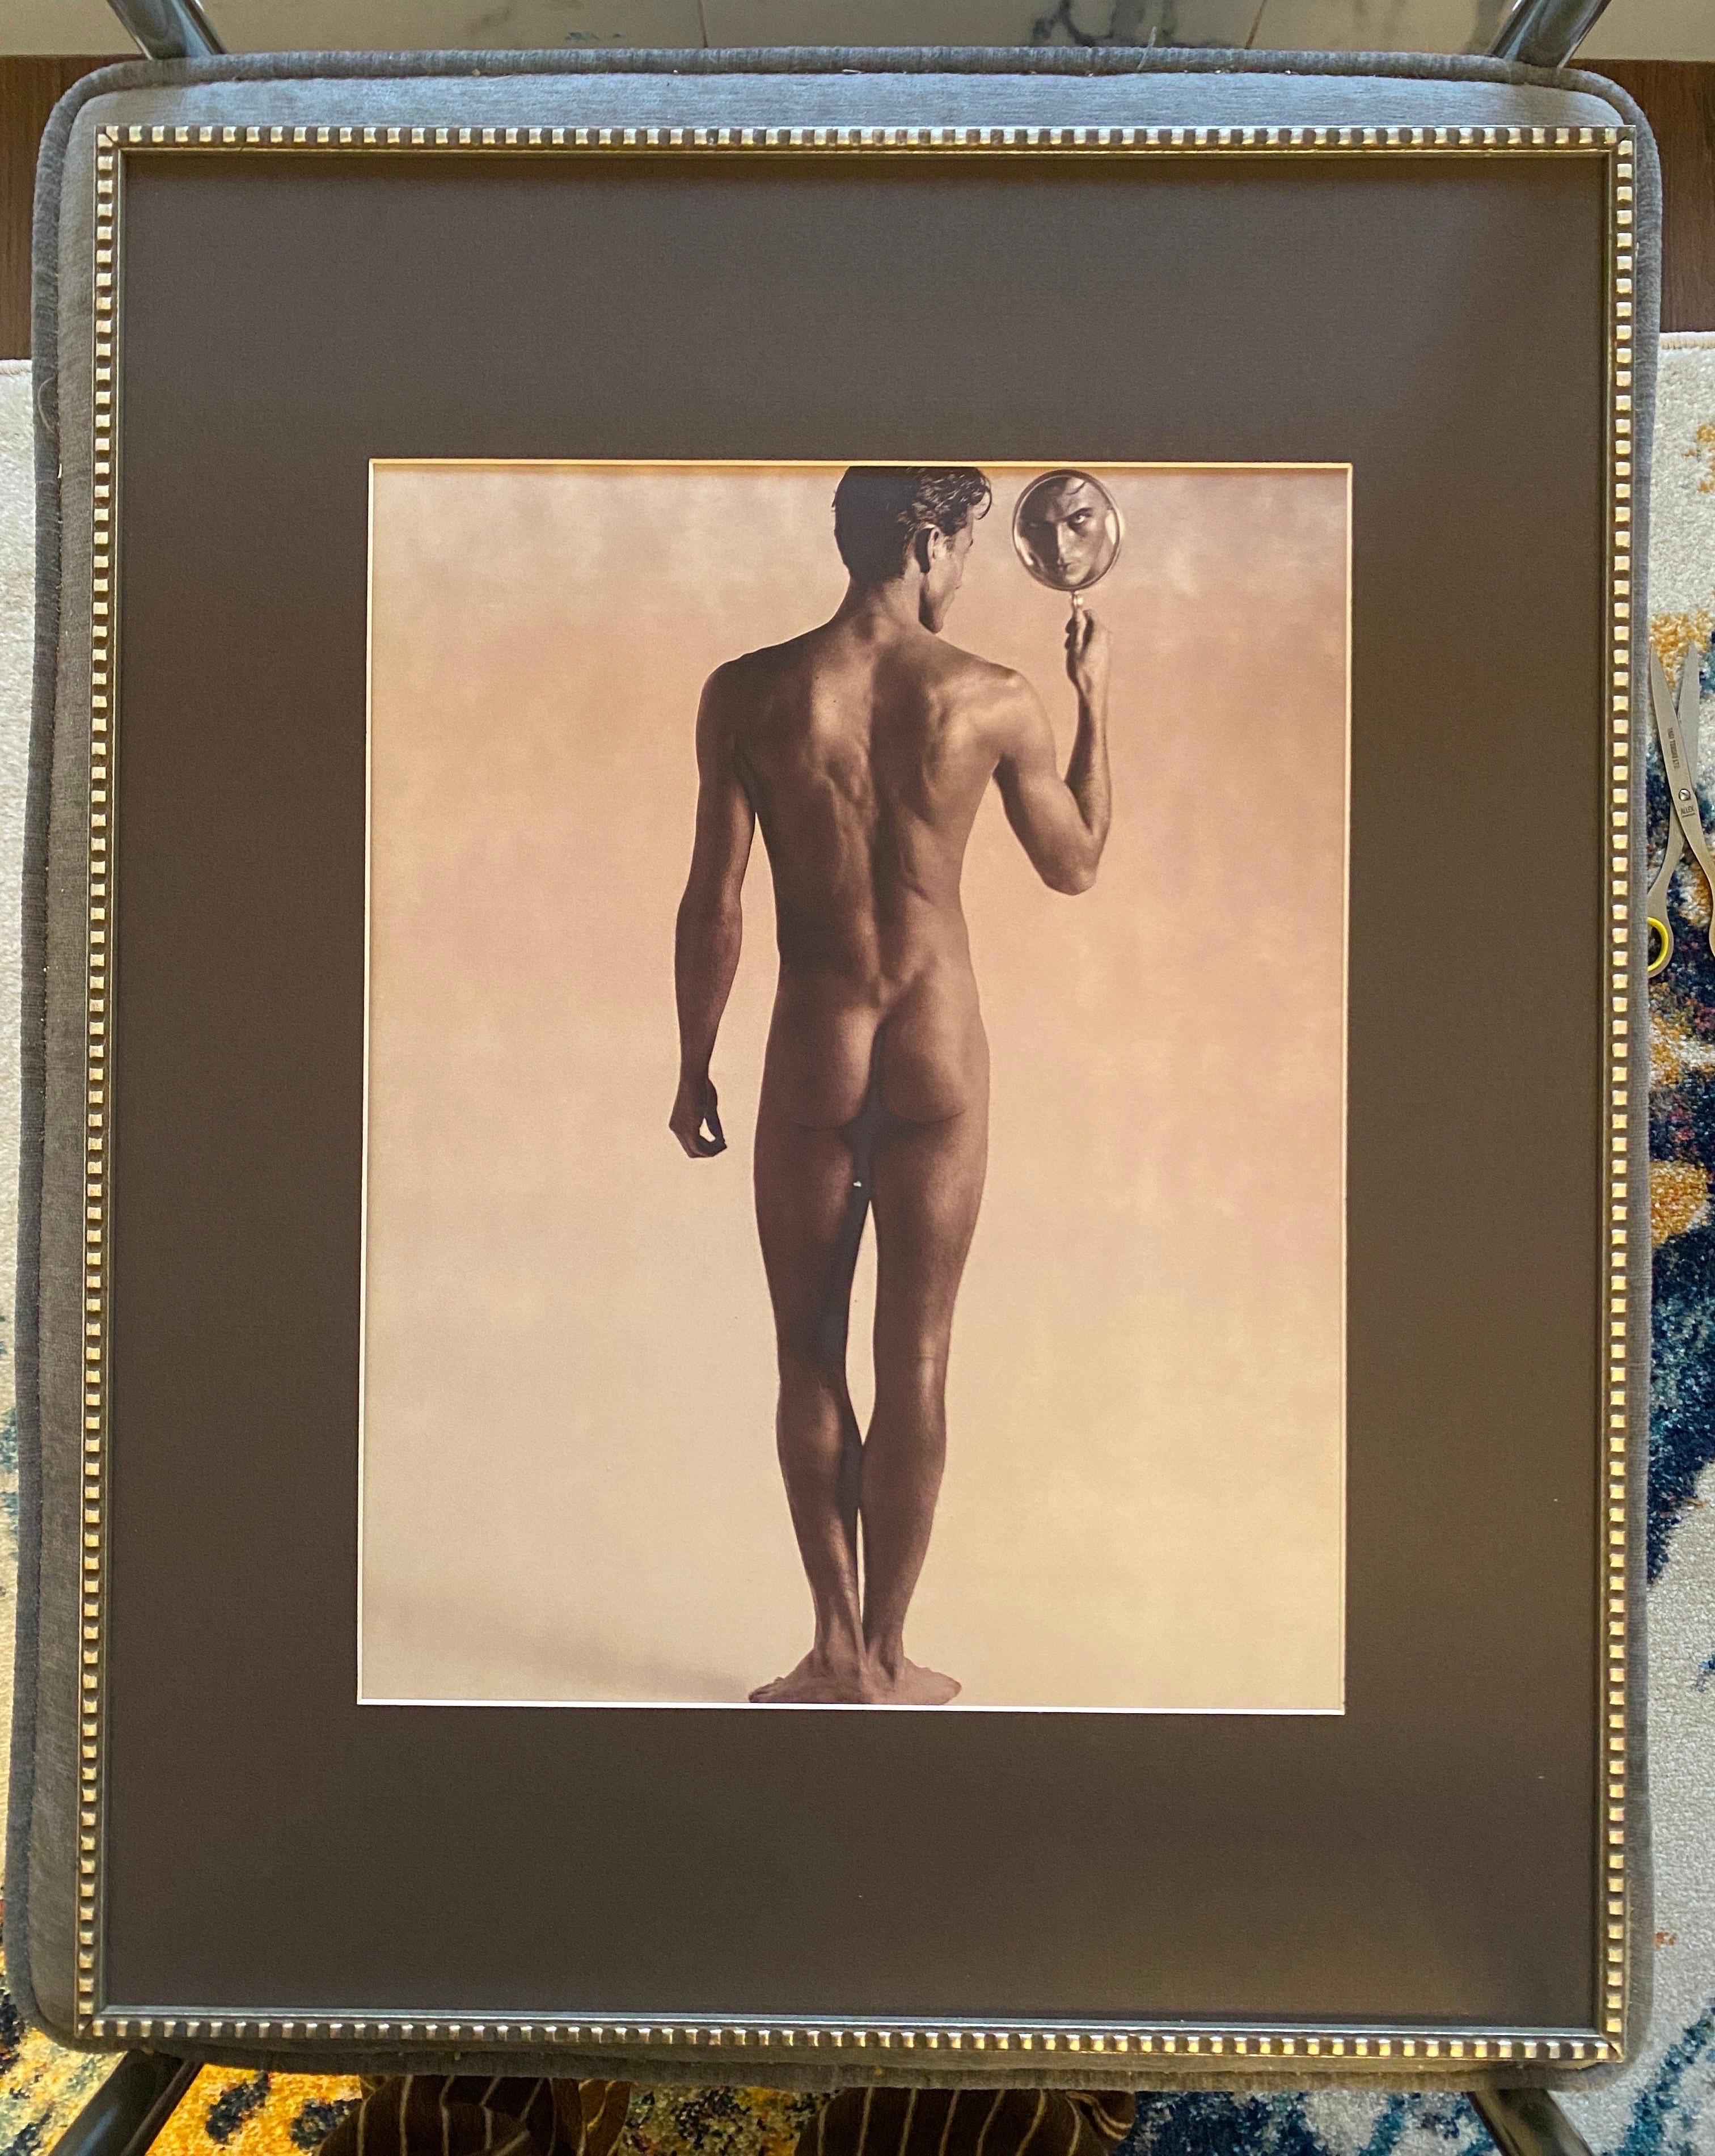 Karl Lagerfeld photograph of Alex Lundqvist, 1997.

This beautiful male nude was included in a boxed series of photograph lithographs of nude models/celebrities done for Visionaire, NYC published in 1997. These rare photo lithos (#3818/5000) are